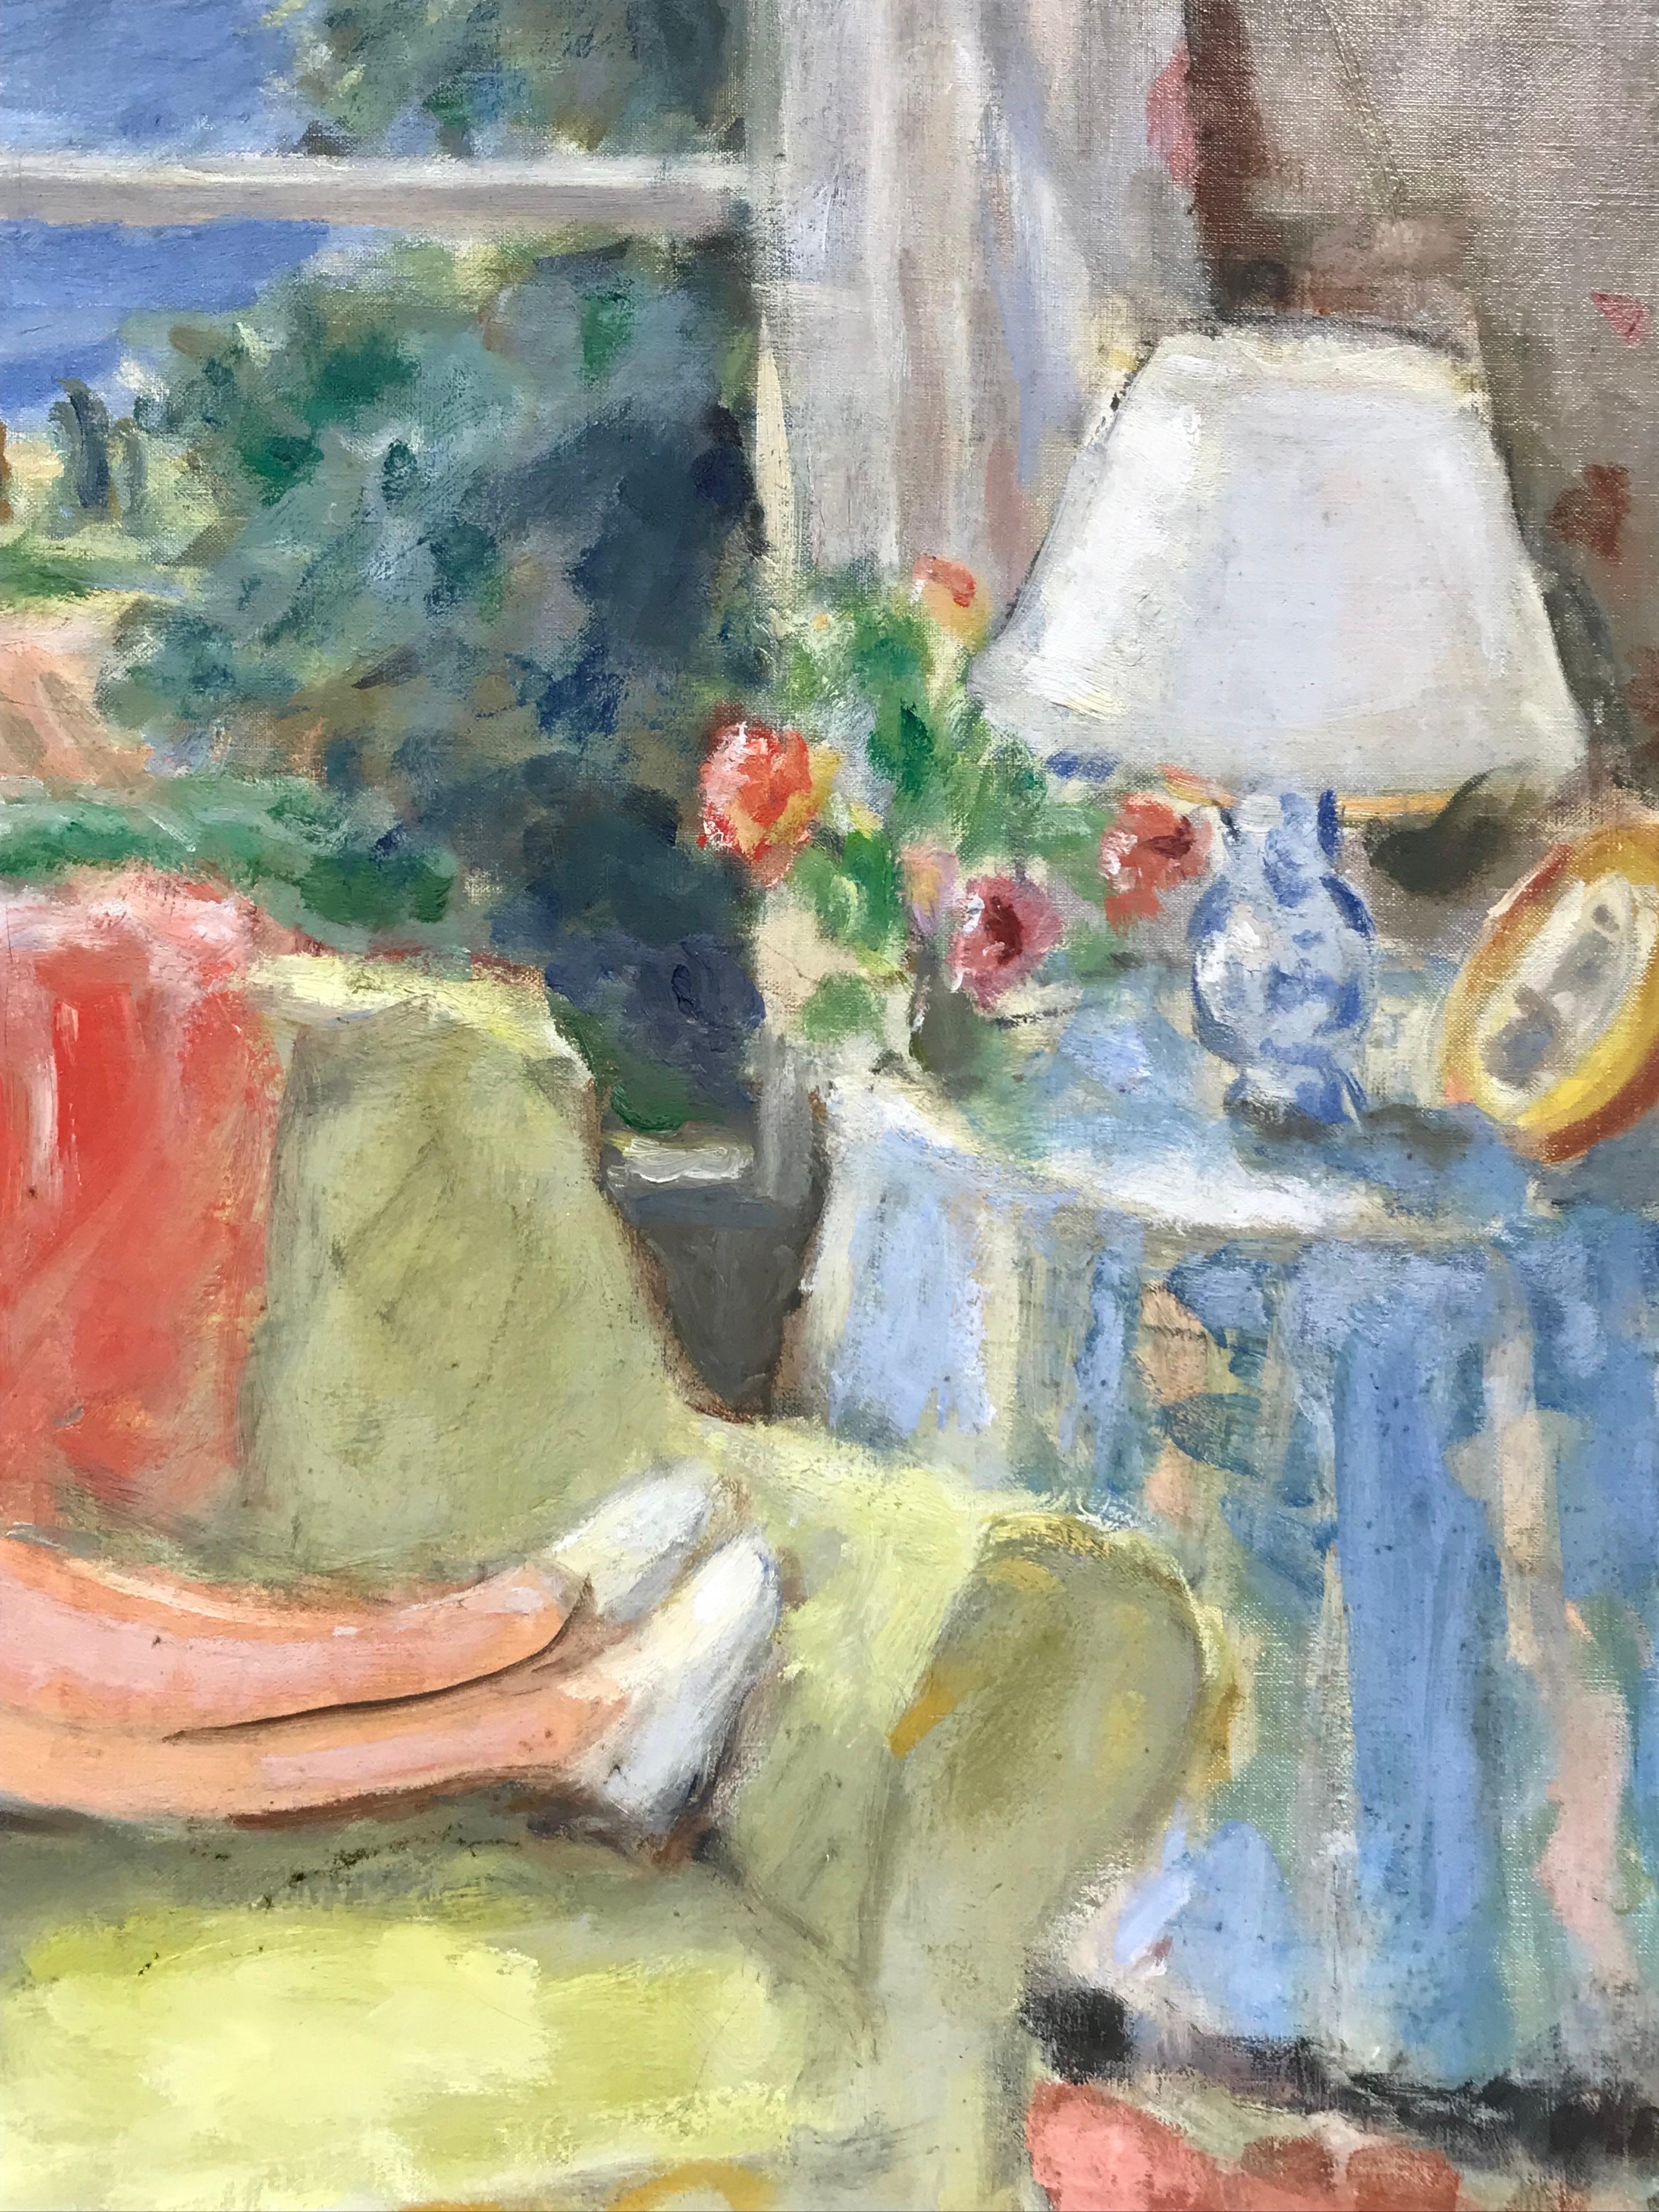 Lady Sitting in Interior Reading Book Window Overlooking Provence Landscape, oil - Impressionist Painting by 20th Century French School